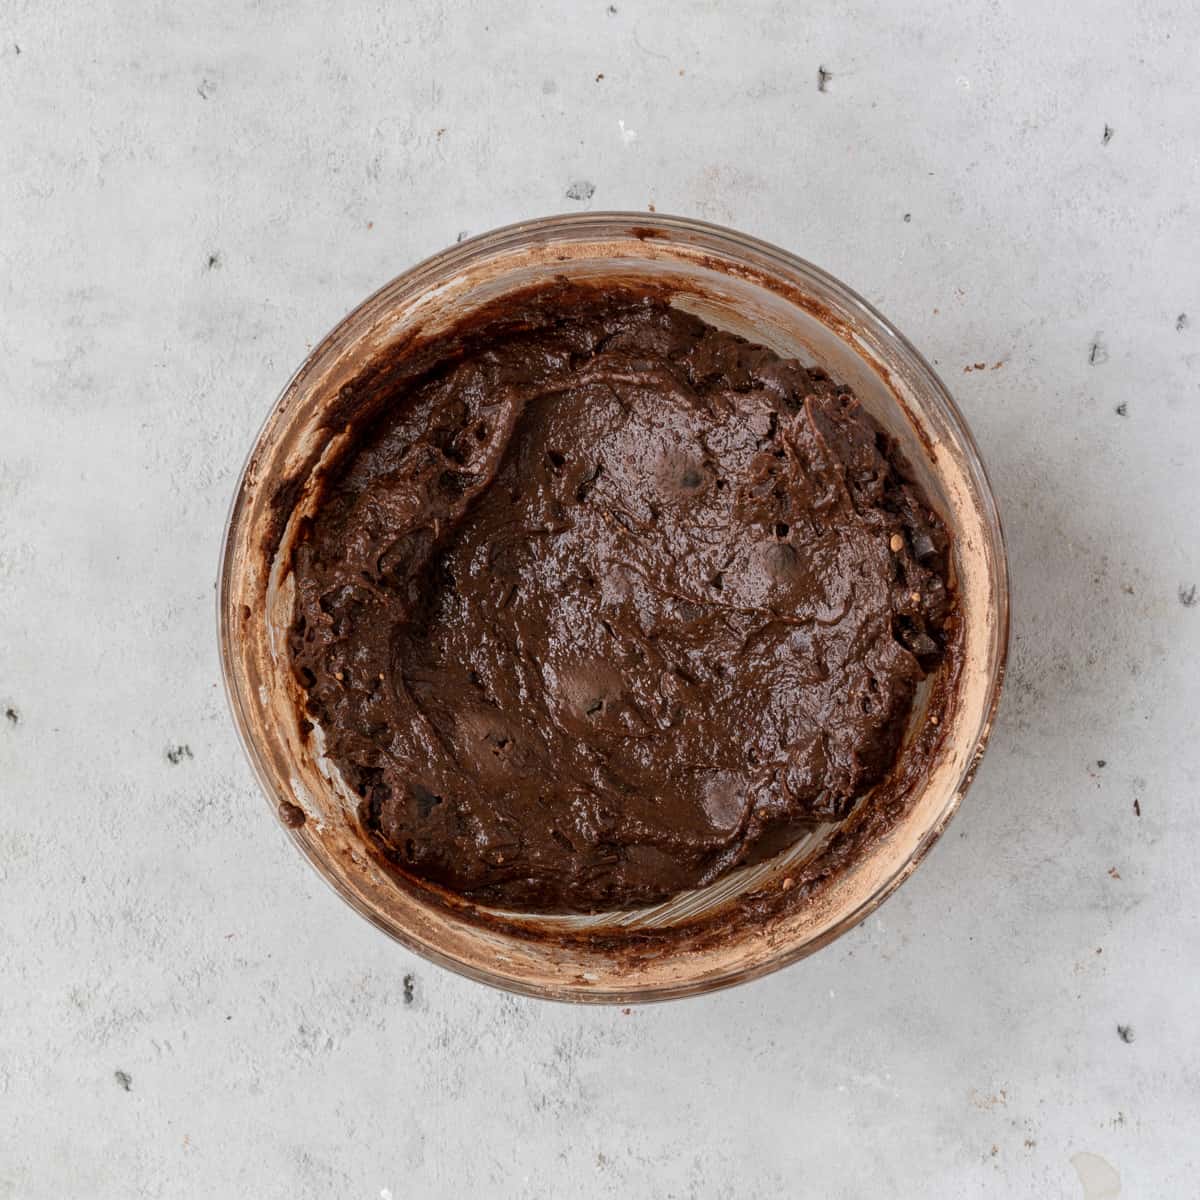 the completed brownie batter in a glass bowl on a grey background